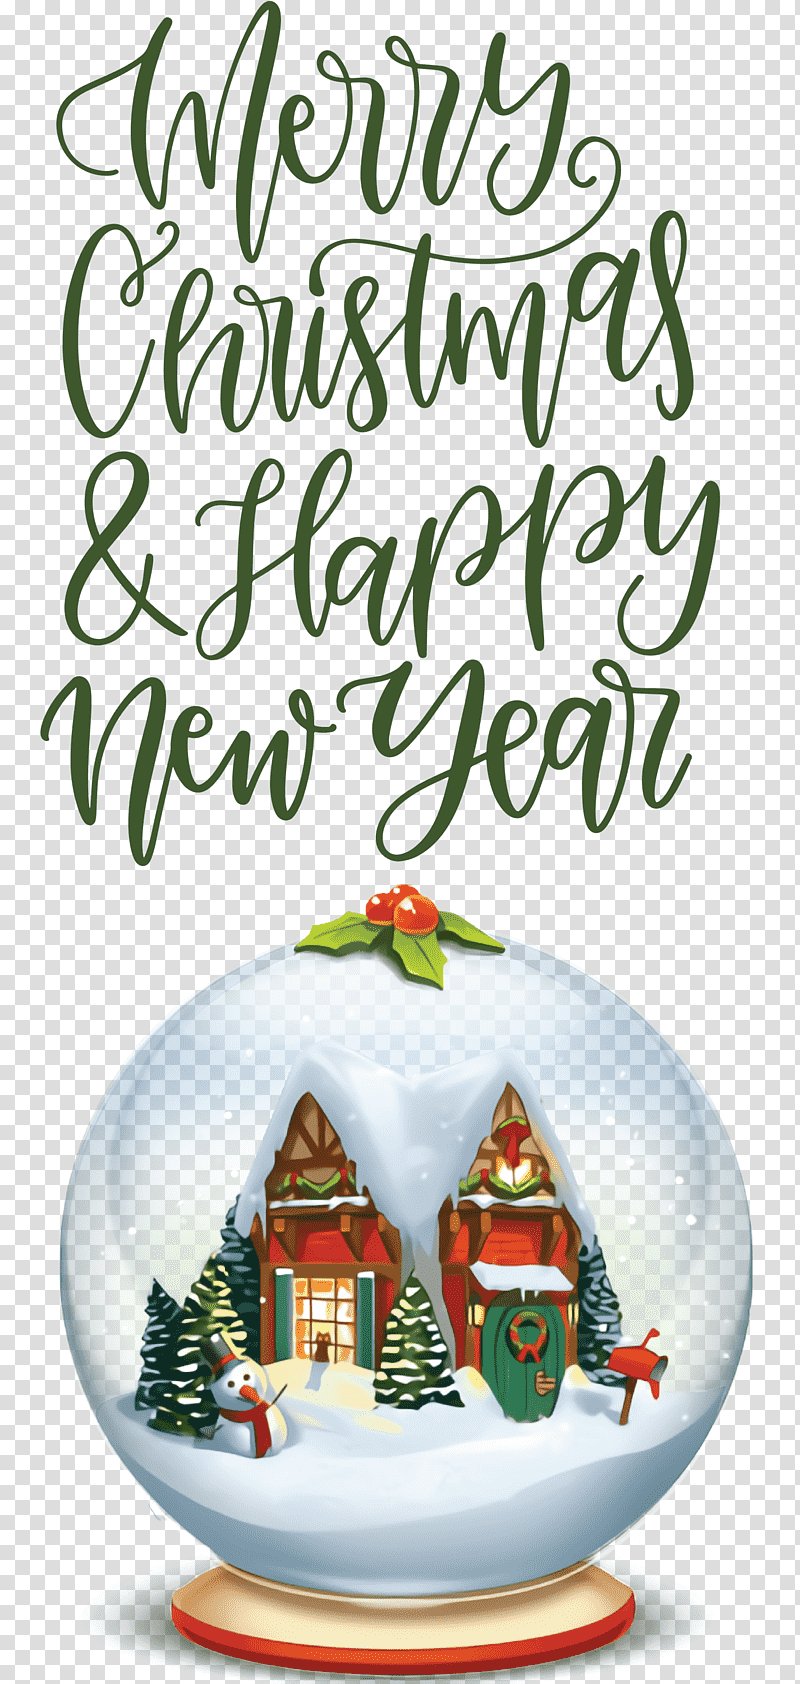 Merry Christmas Happy New Year, Christmas Day, Christmas Ornament, Christmas Tree, Holiday Ornament, Christmas Ornament M, Meter transparent background PNG clipart